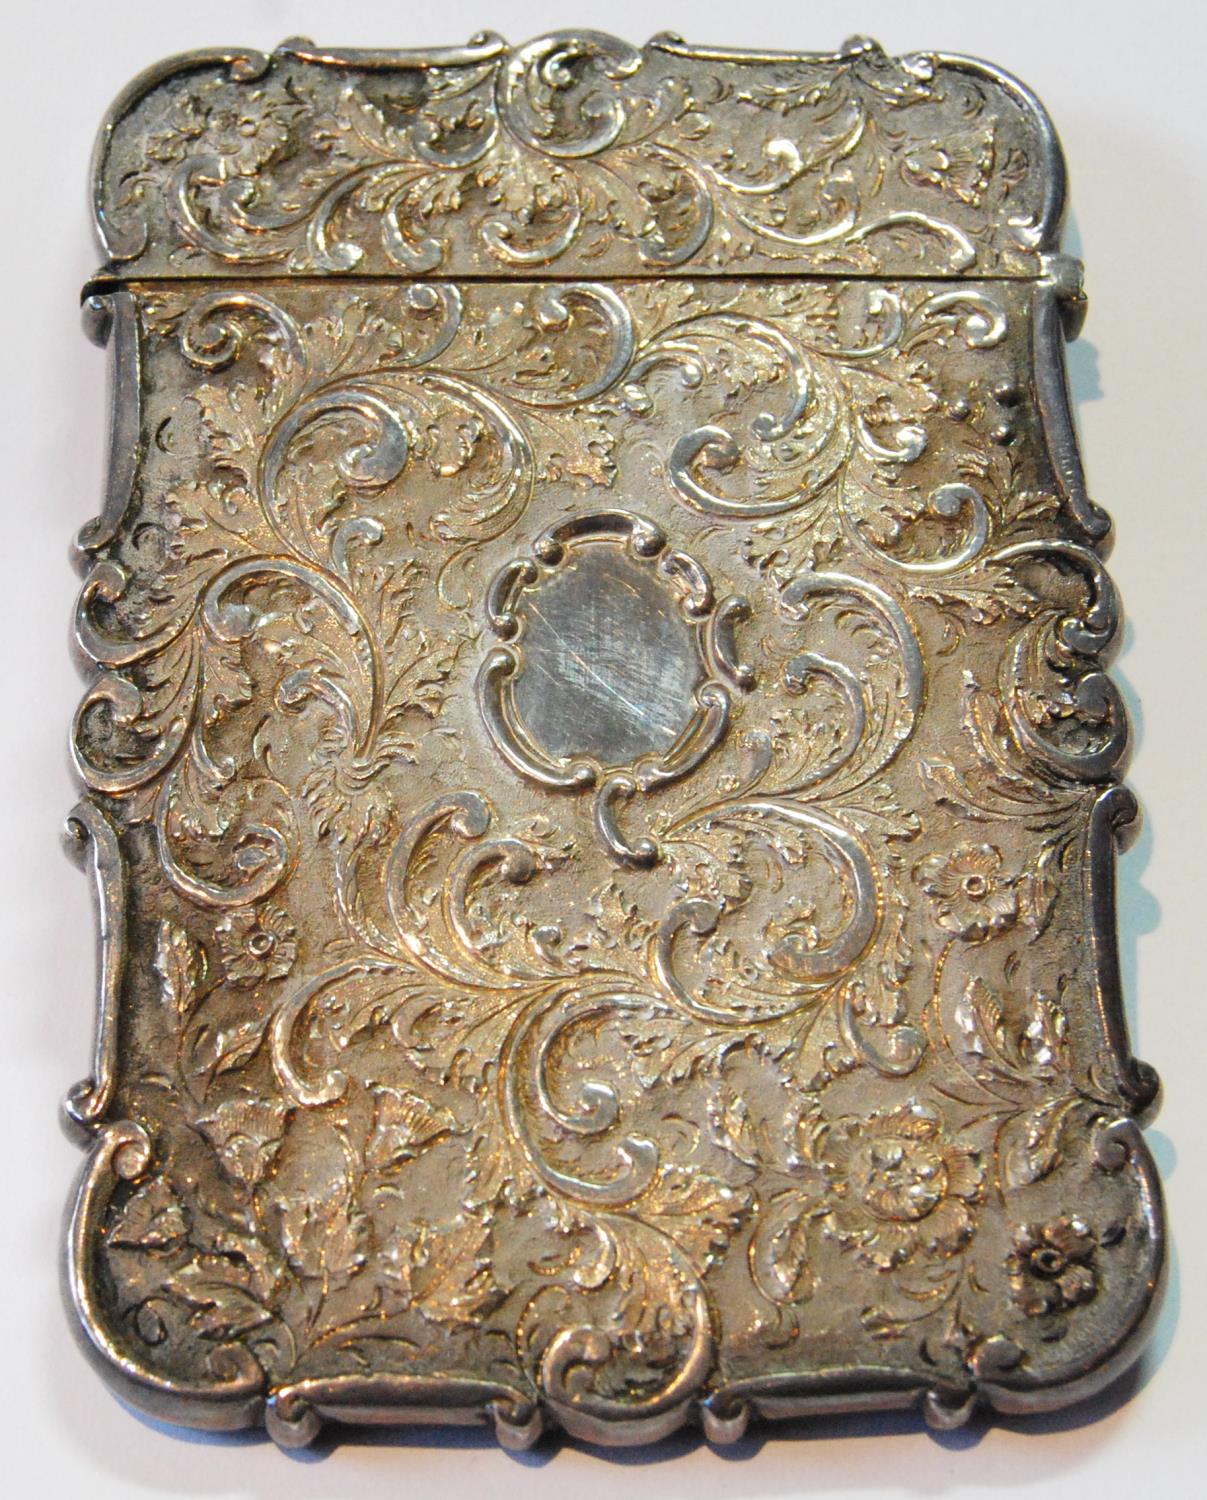 Silver 'castle top' card case with a view of York Minster in high relief amongst scrolls by - Image 3 of 4